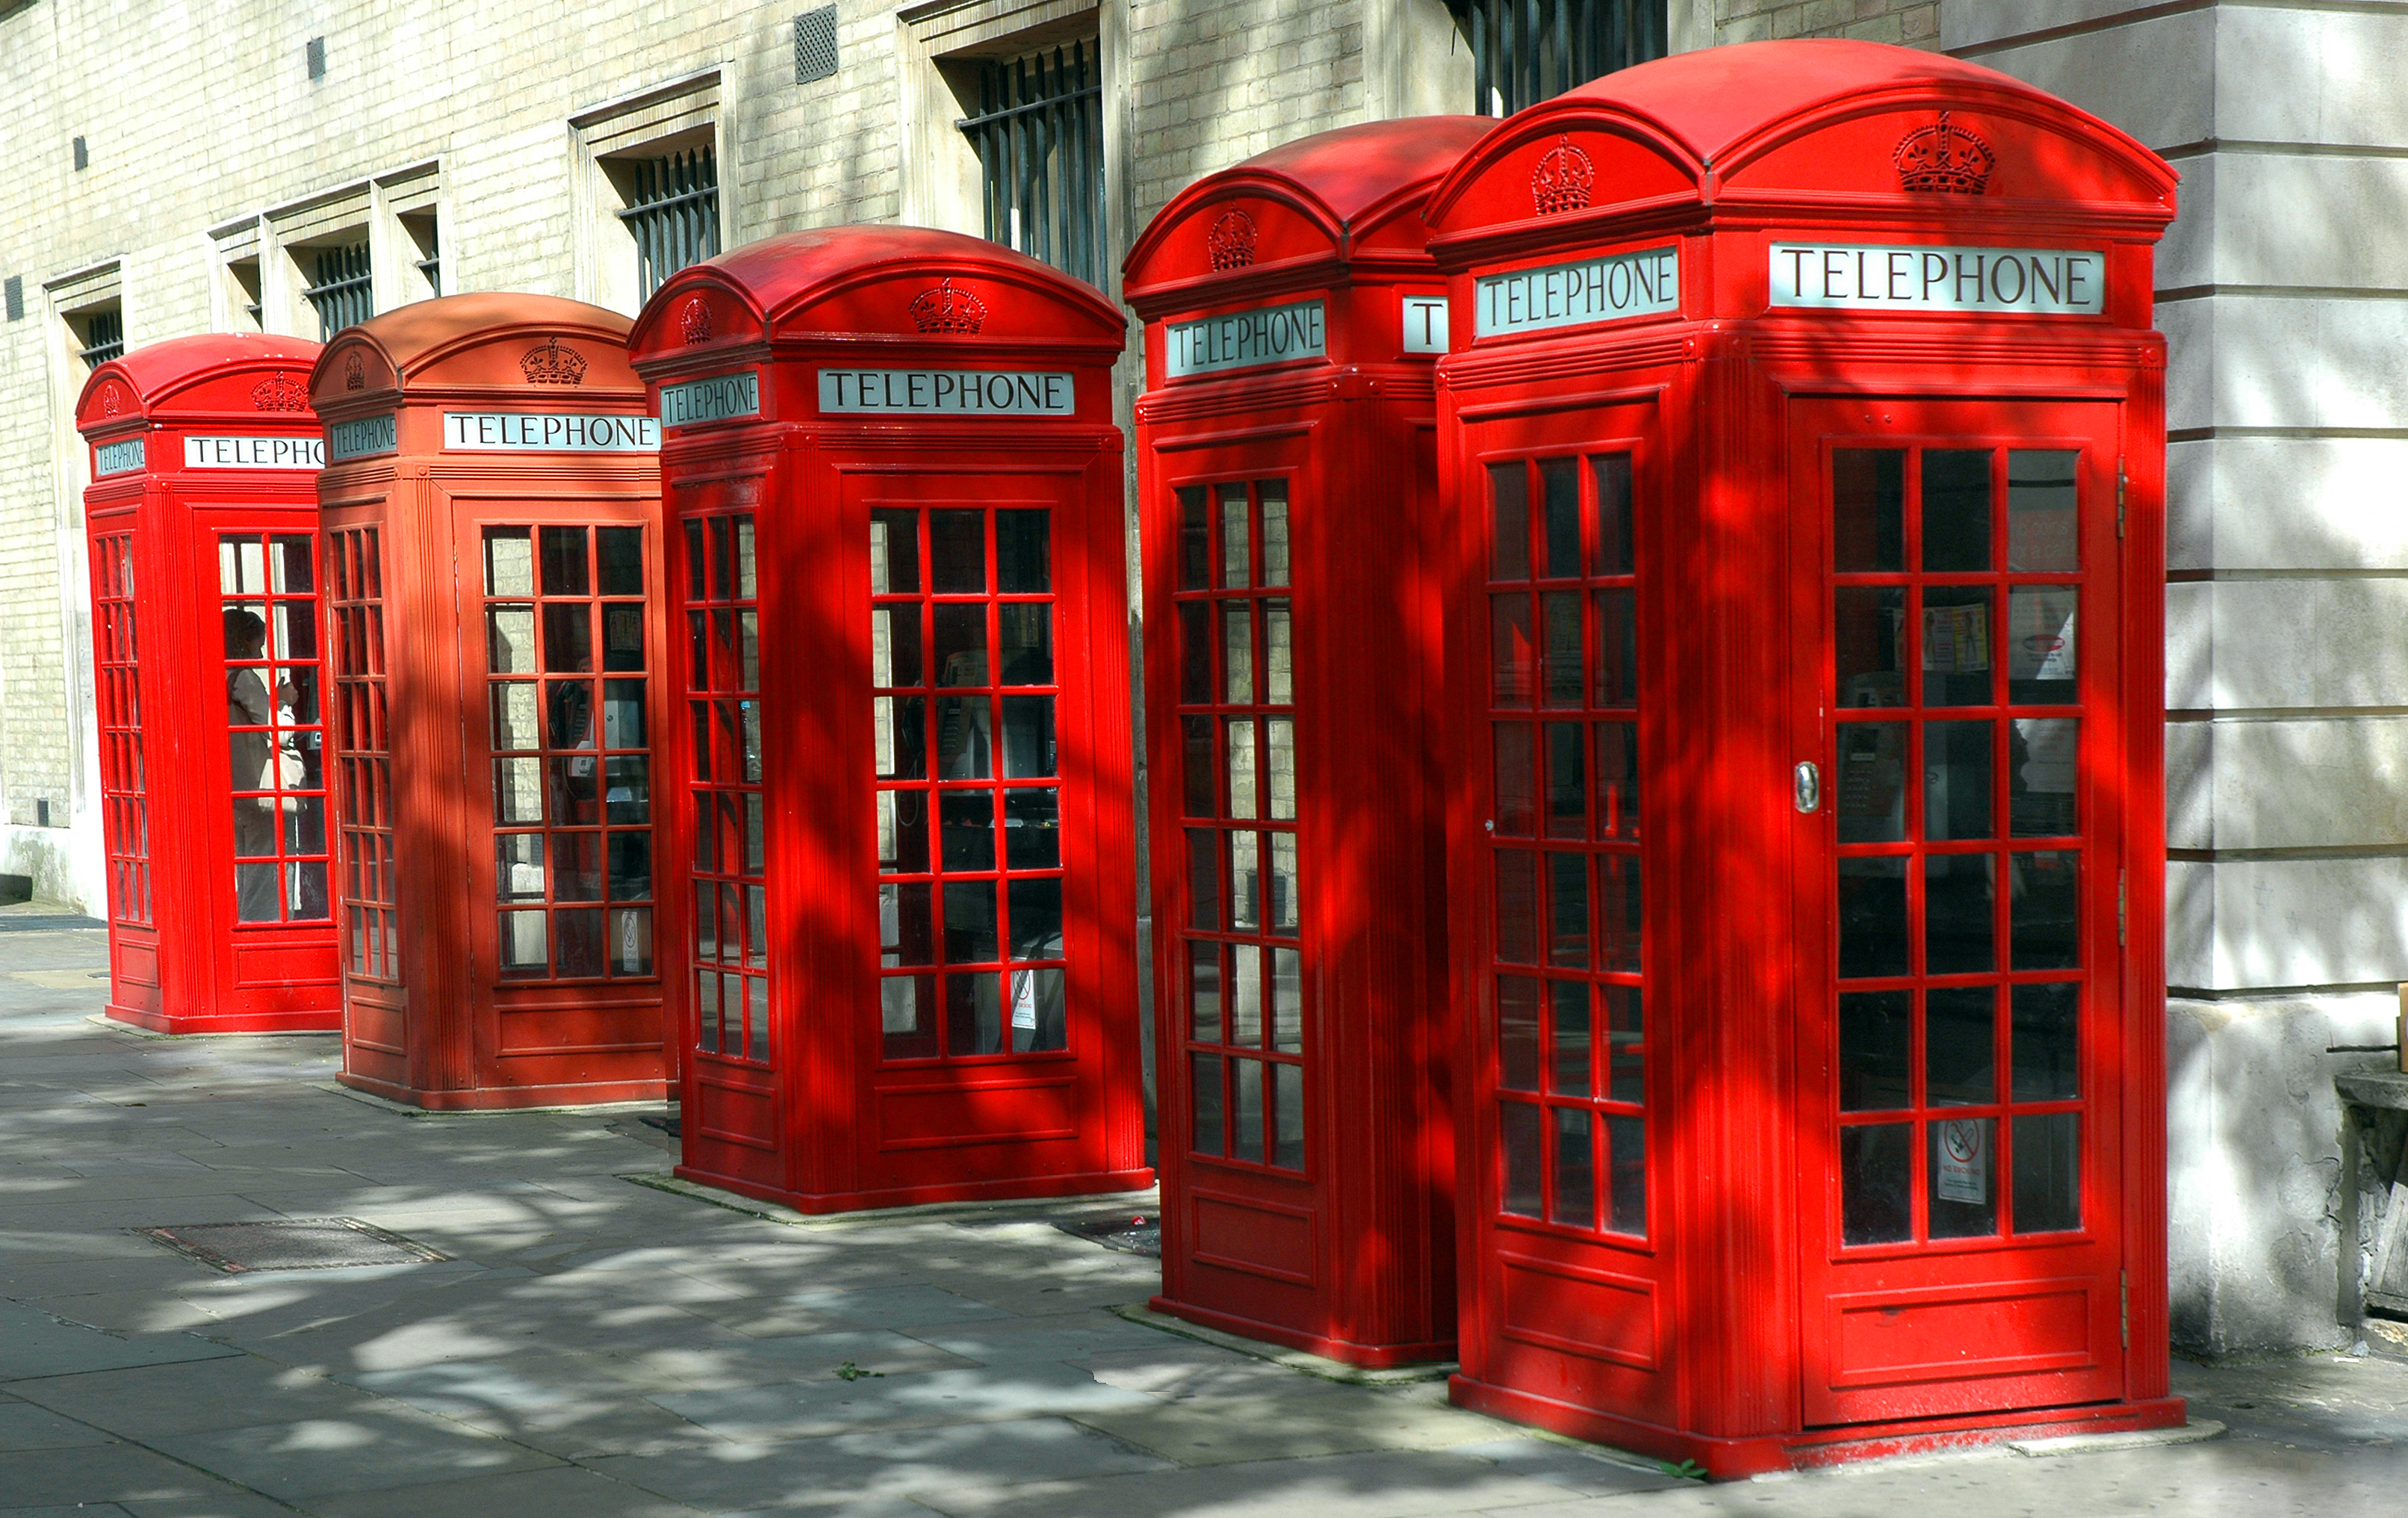 5 Red Telephone Booths, London, England | pantheon photography ...